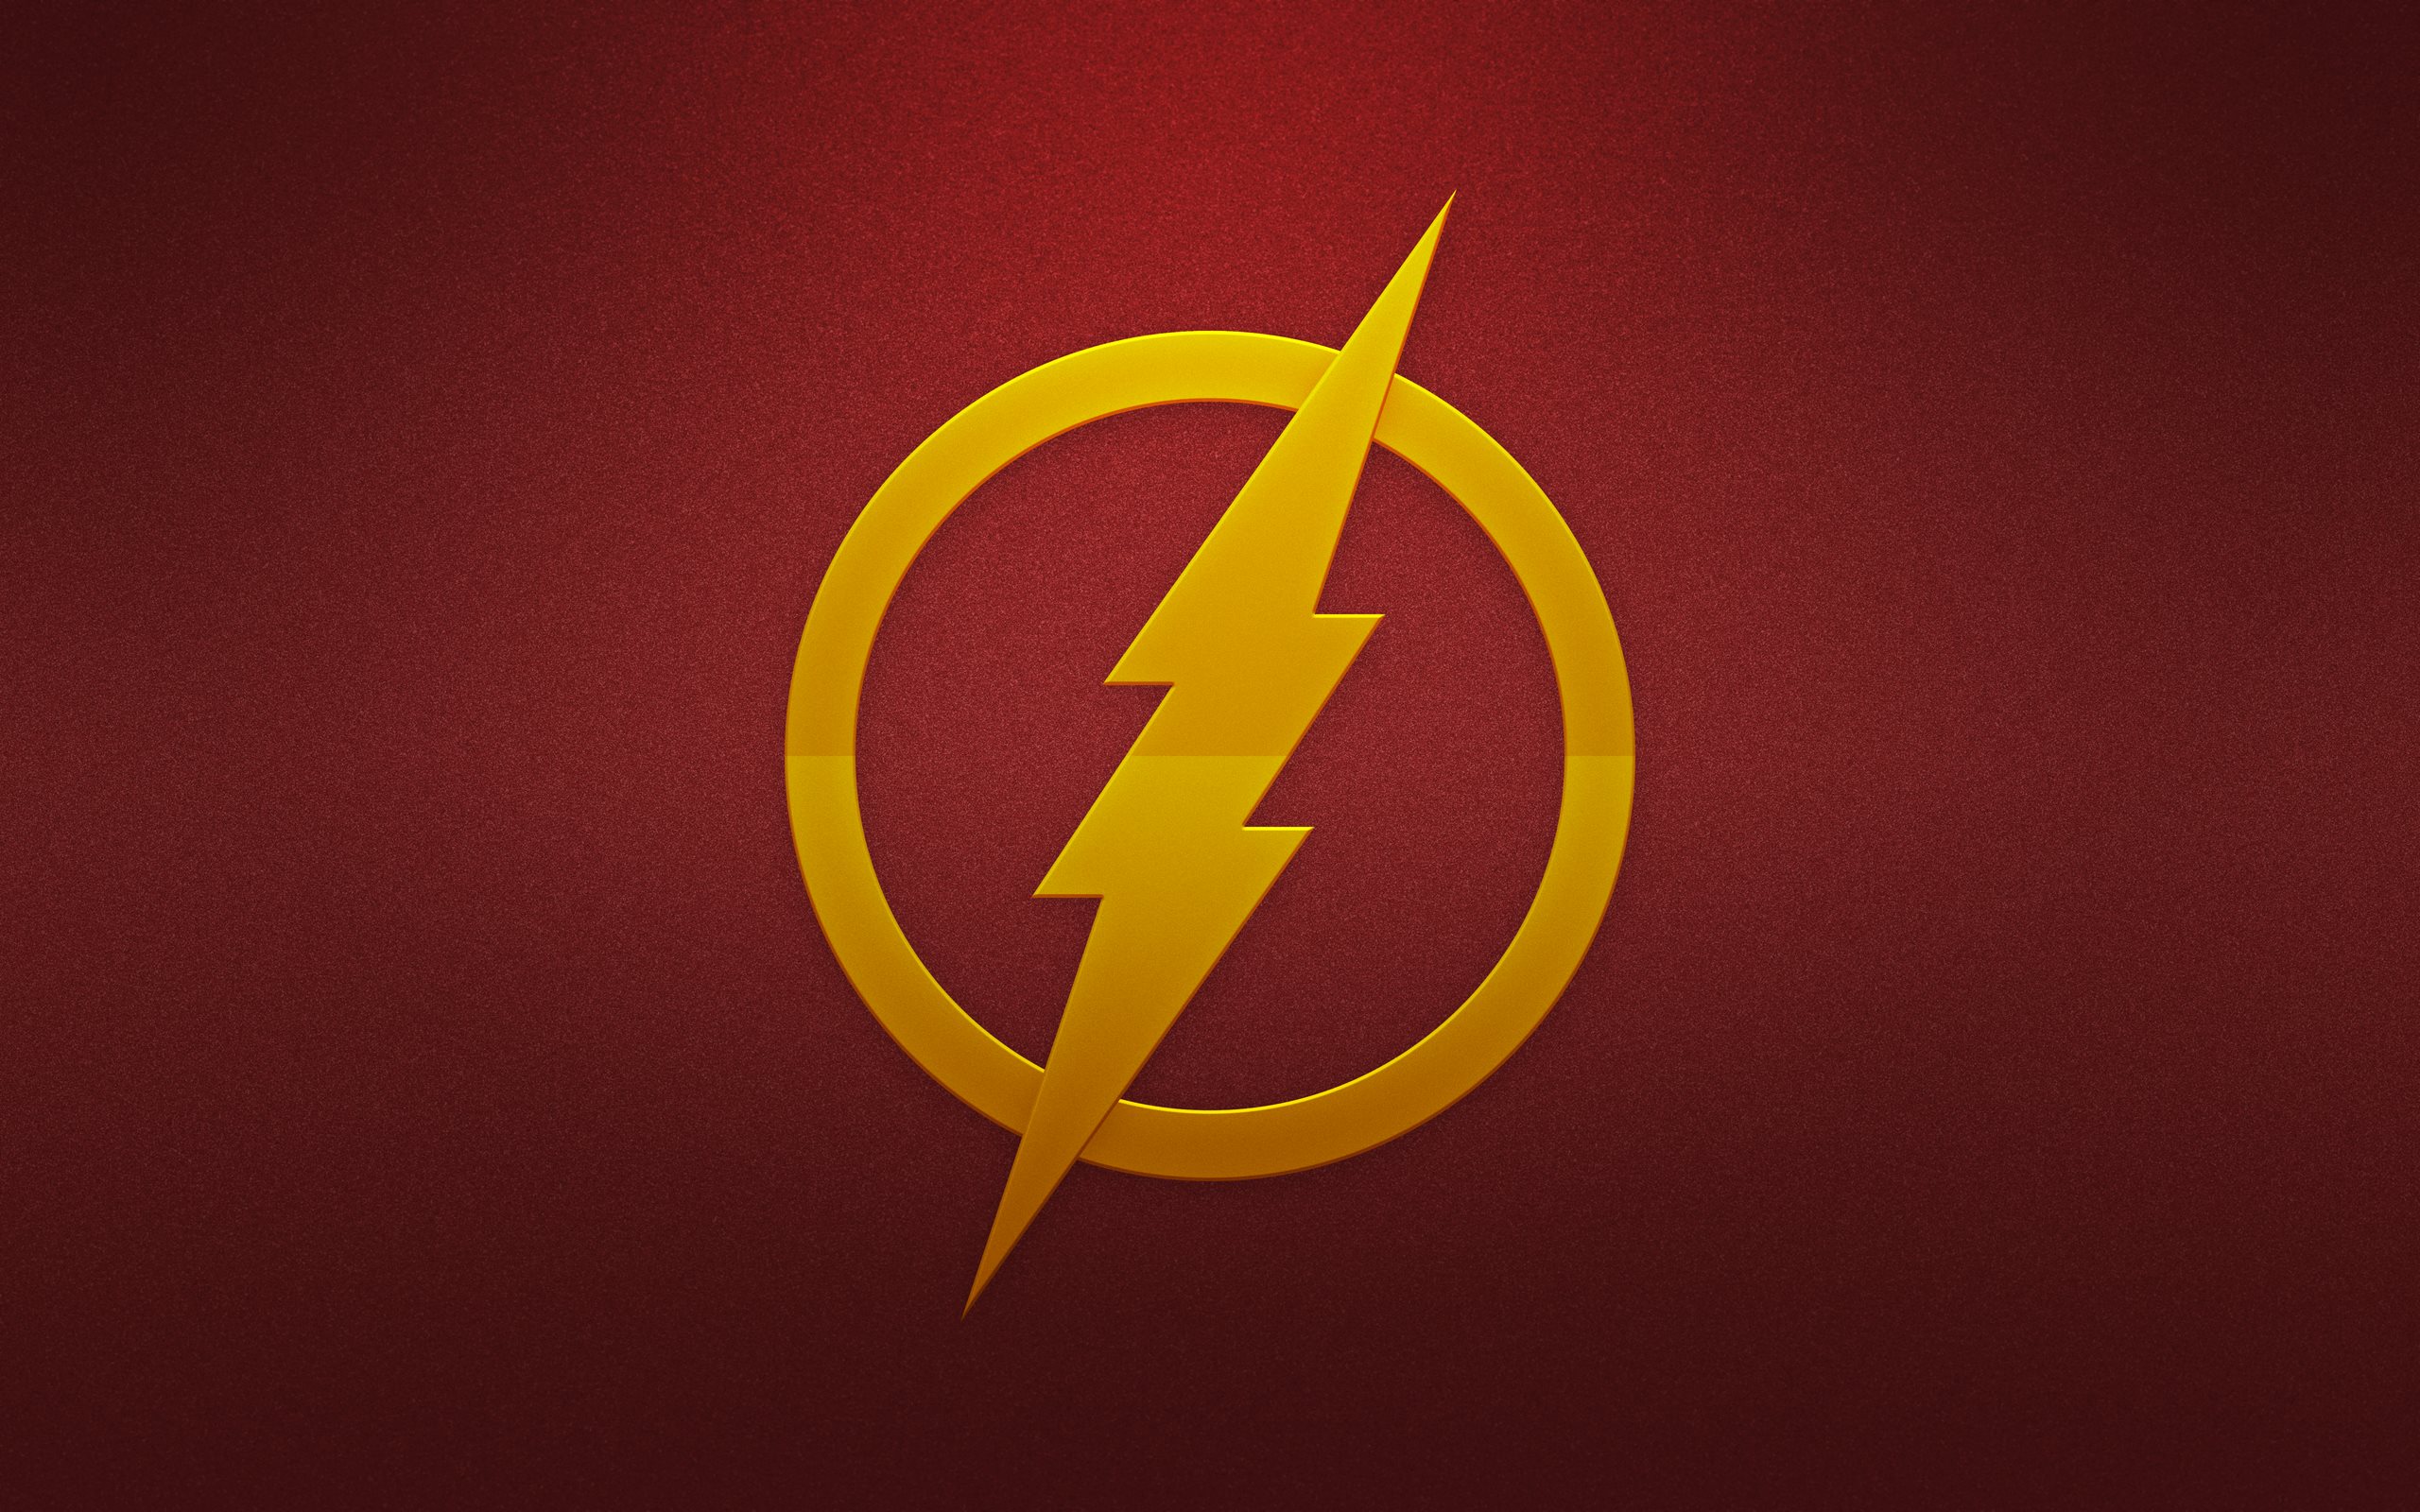 The Flash Wallpapers Archives - Page 3 of 9 - WideWallpaper.info ...